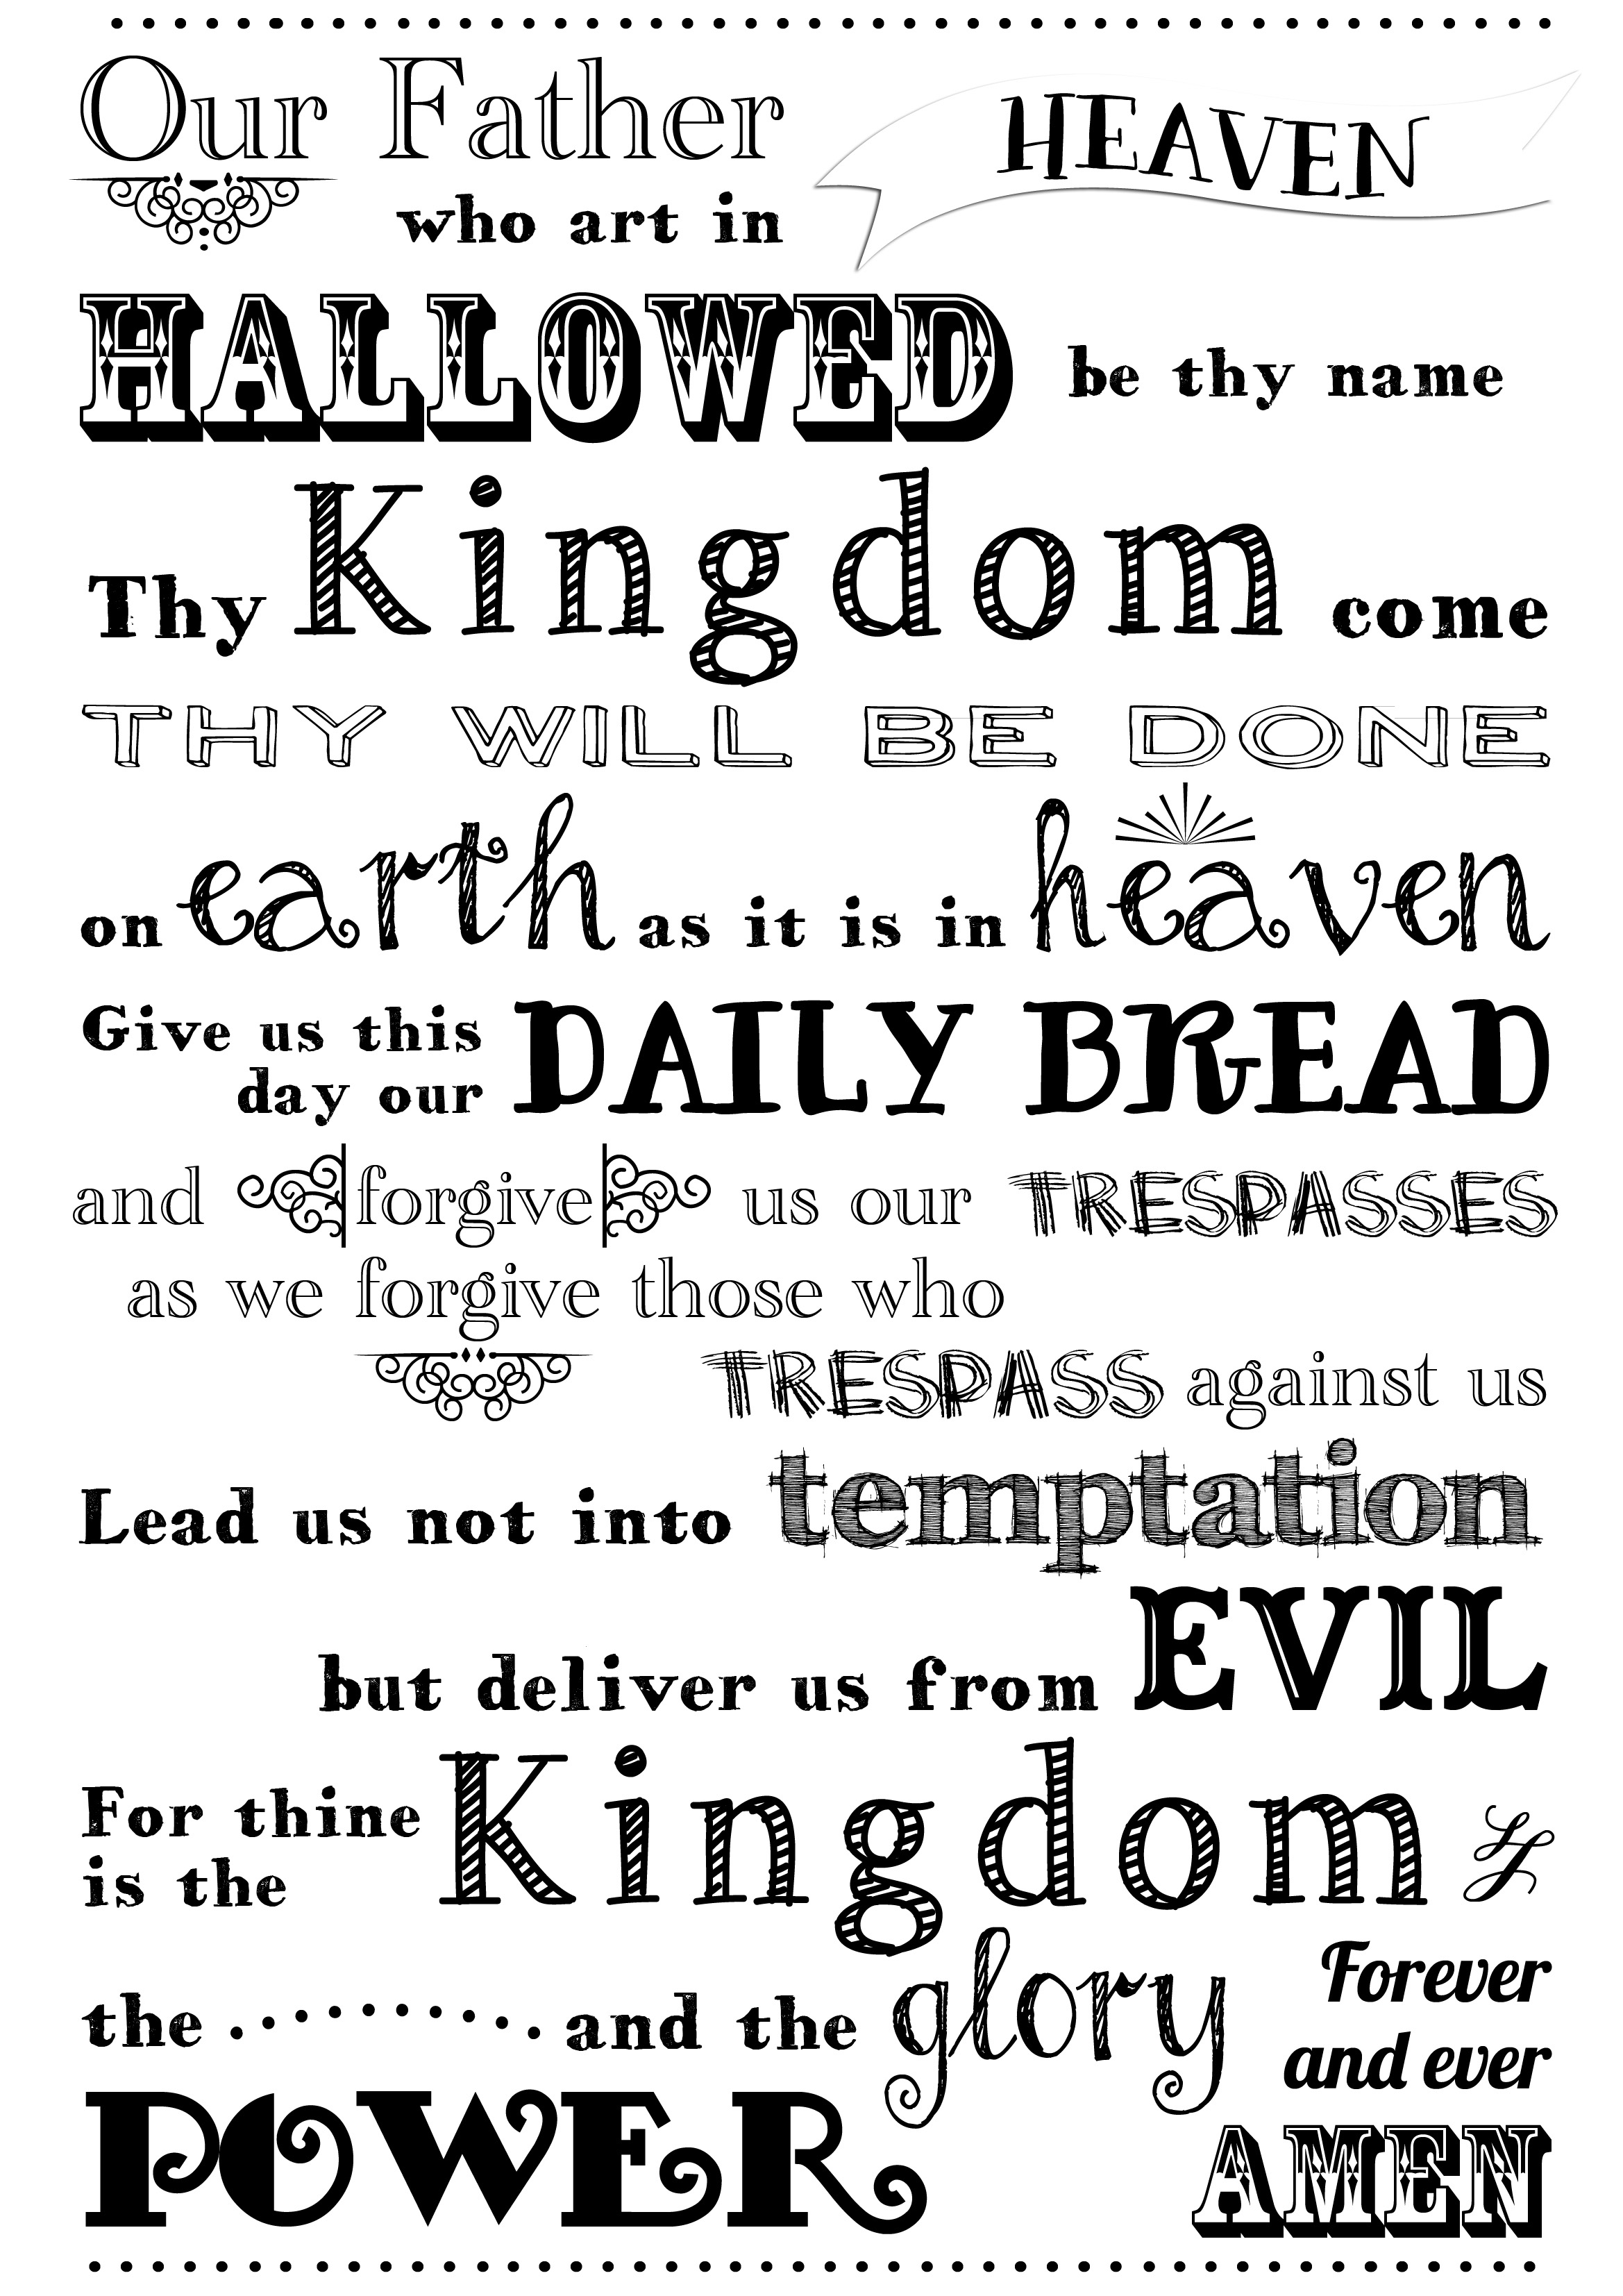 7-best-images-of-the-lord-s-prayer-words-printable-lord-s-prayer-to-print-free-printable-lord